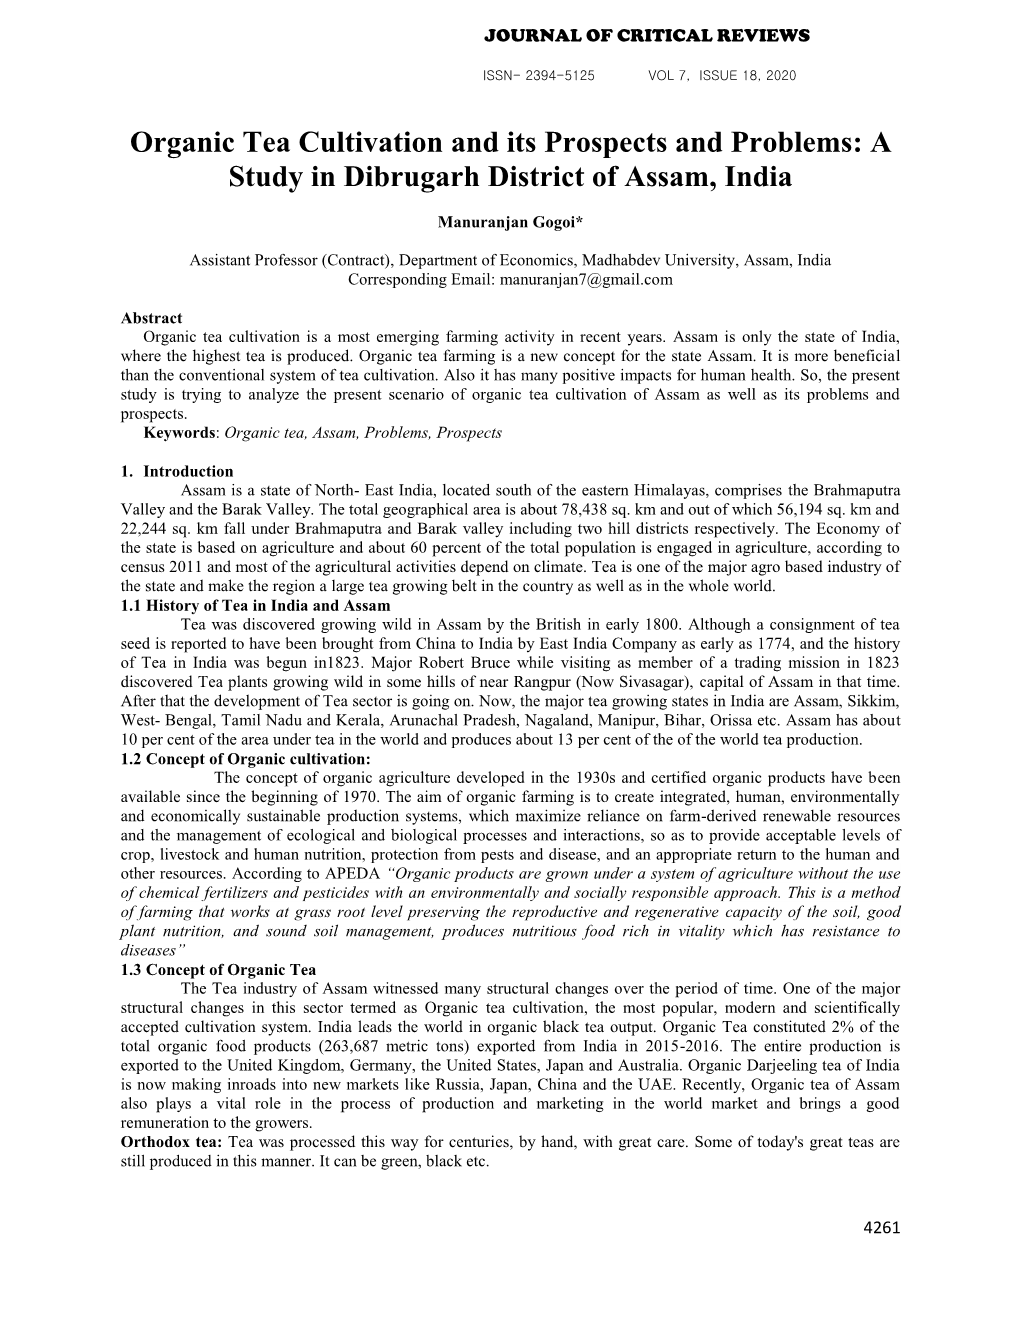 Organic Tea Cultivation and Its Prospects and Problems: a Study in Dibrugarh District of Assam, India